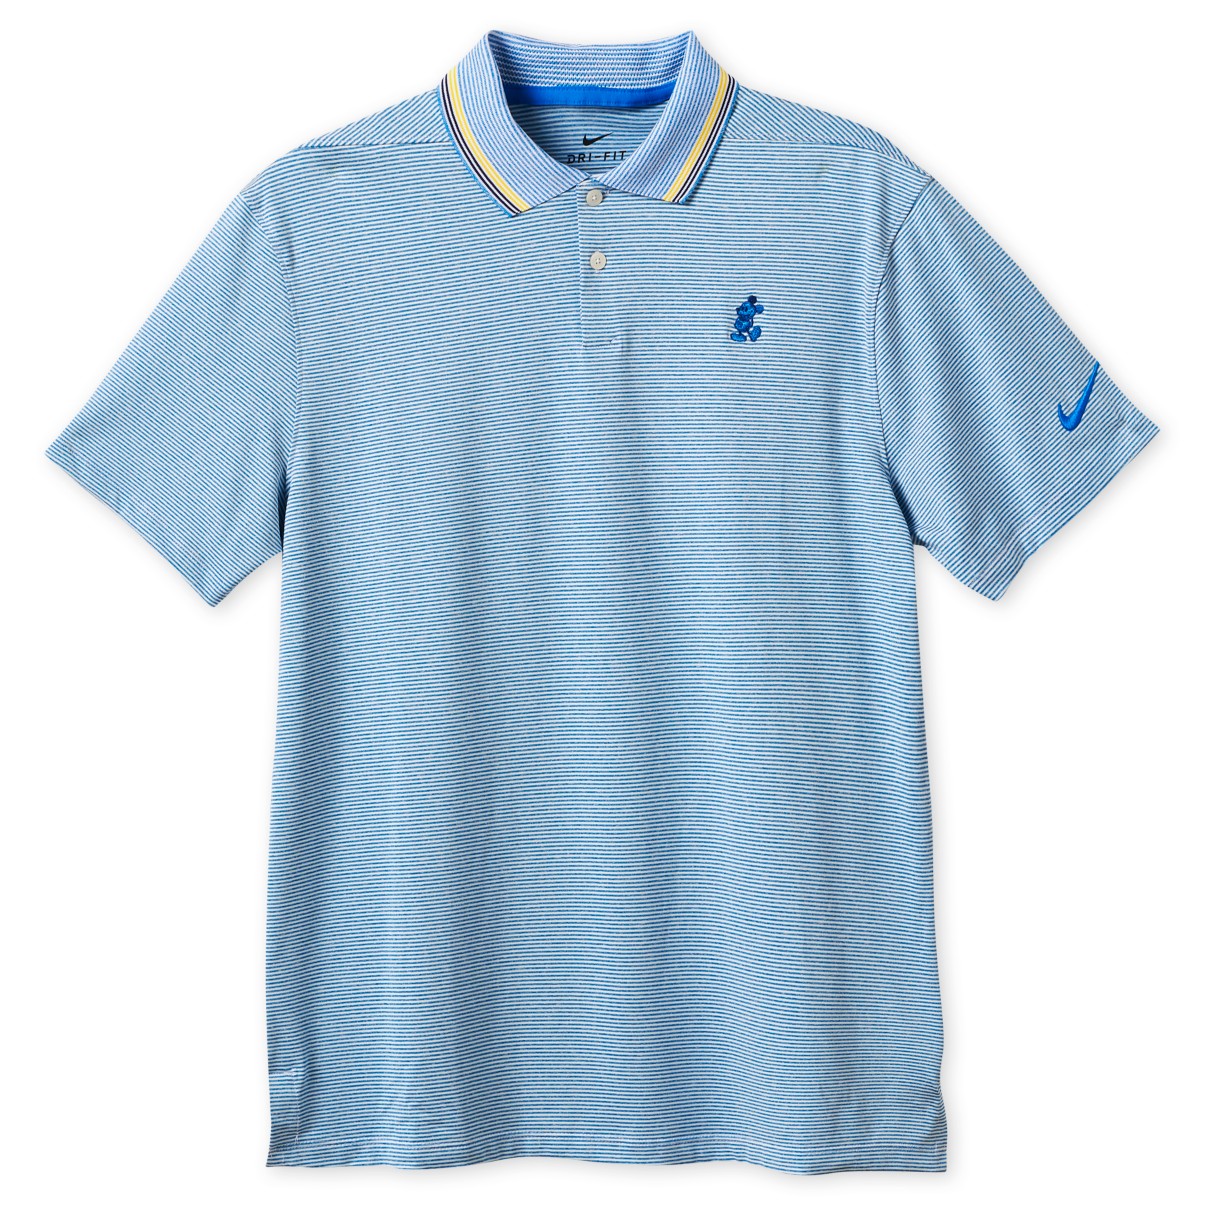 Mickey Mouse Performance Polo Shirt for Men by Nike Golf – Navy Stripe